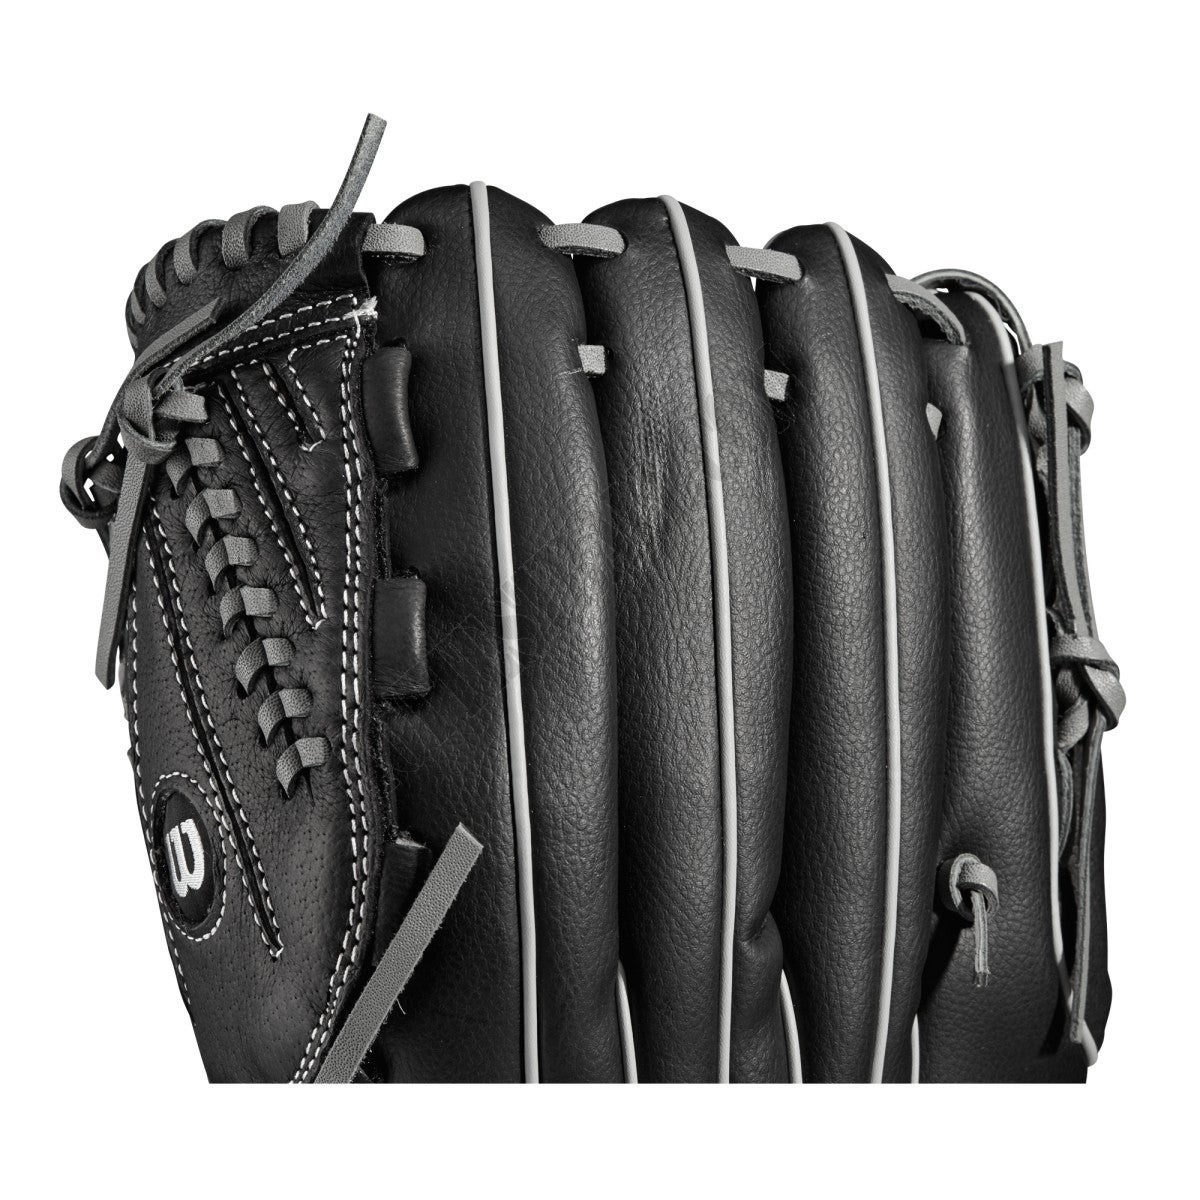 A360 13" Slowpitch Glove - Left Hand Throw ● Wilson Promotions - -4